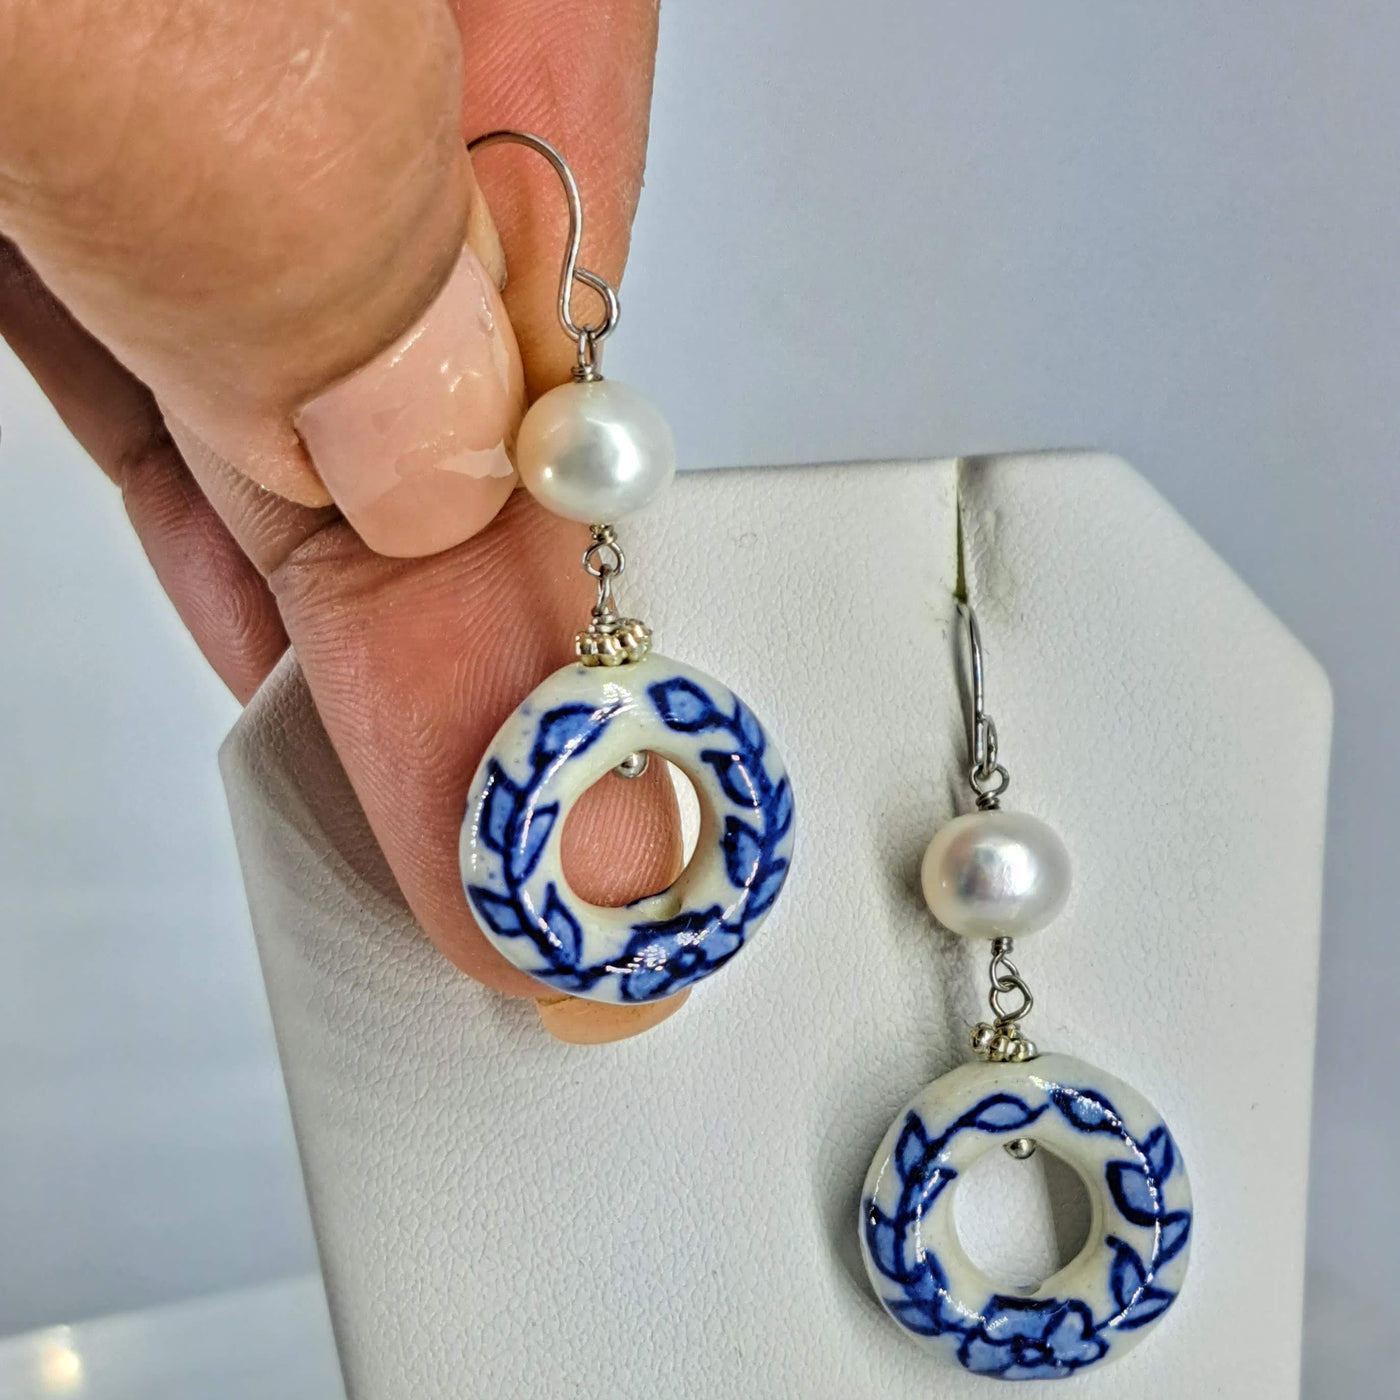 "Blue China" 1.75" Earrings - Pearls, Porcelain, Sterling